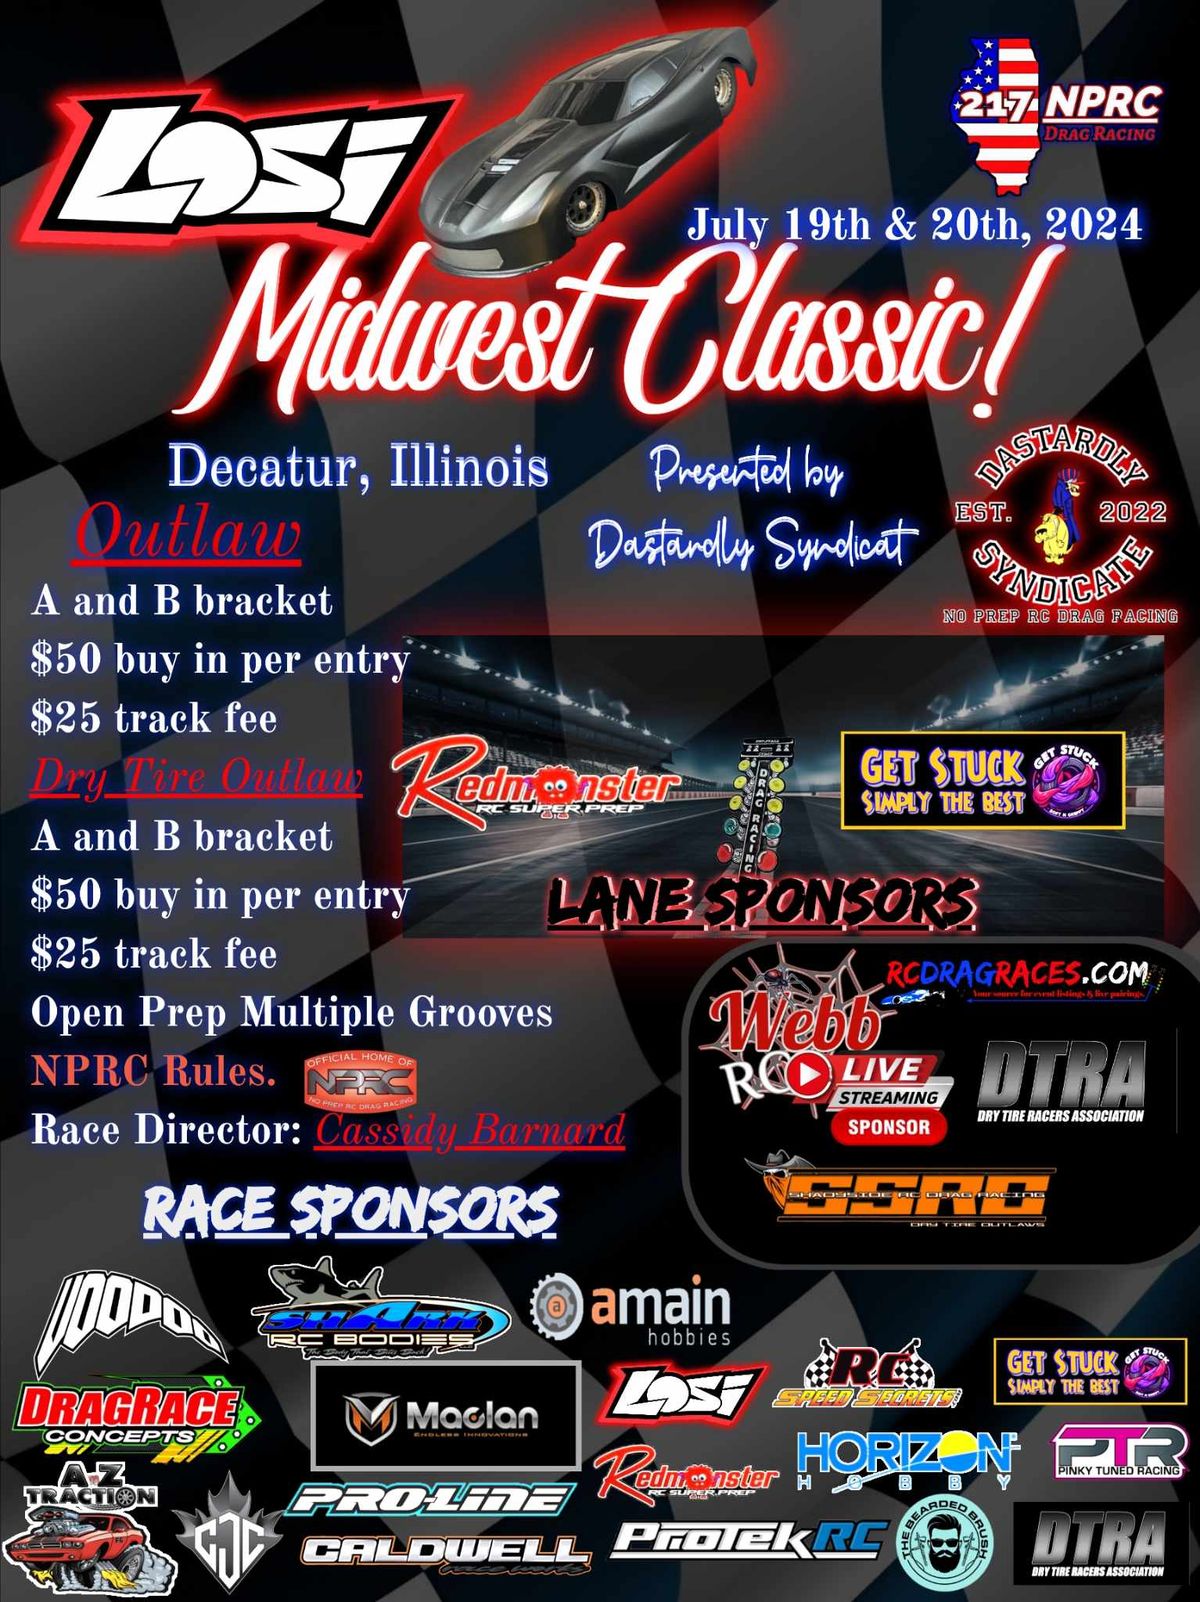 217 NPRC MIDWEST CLASSIC PRESENTED BY THE DASTARDLY SYNDICATE 